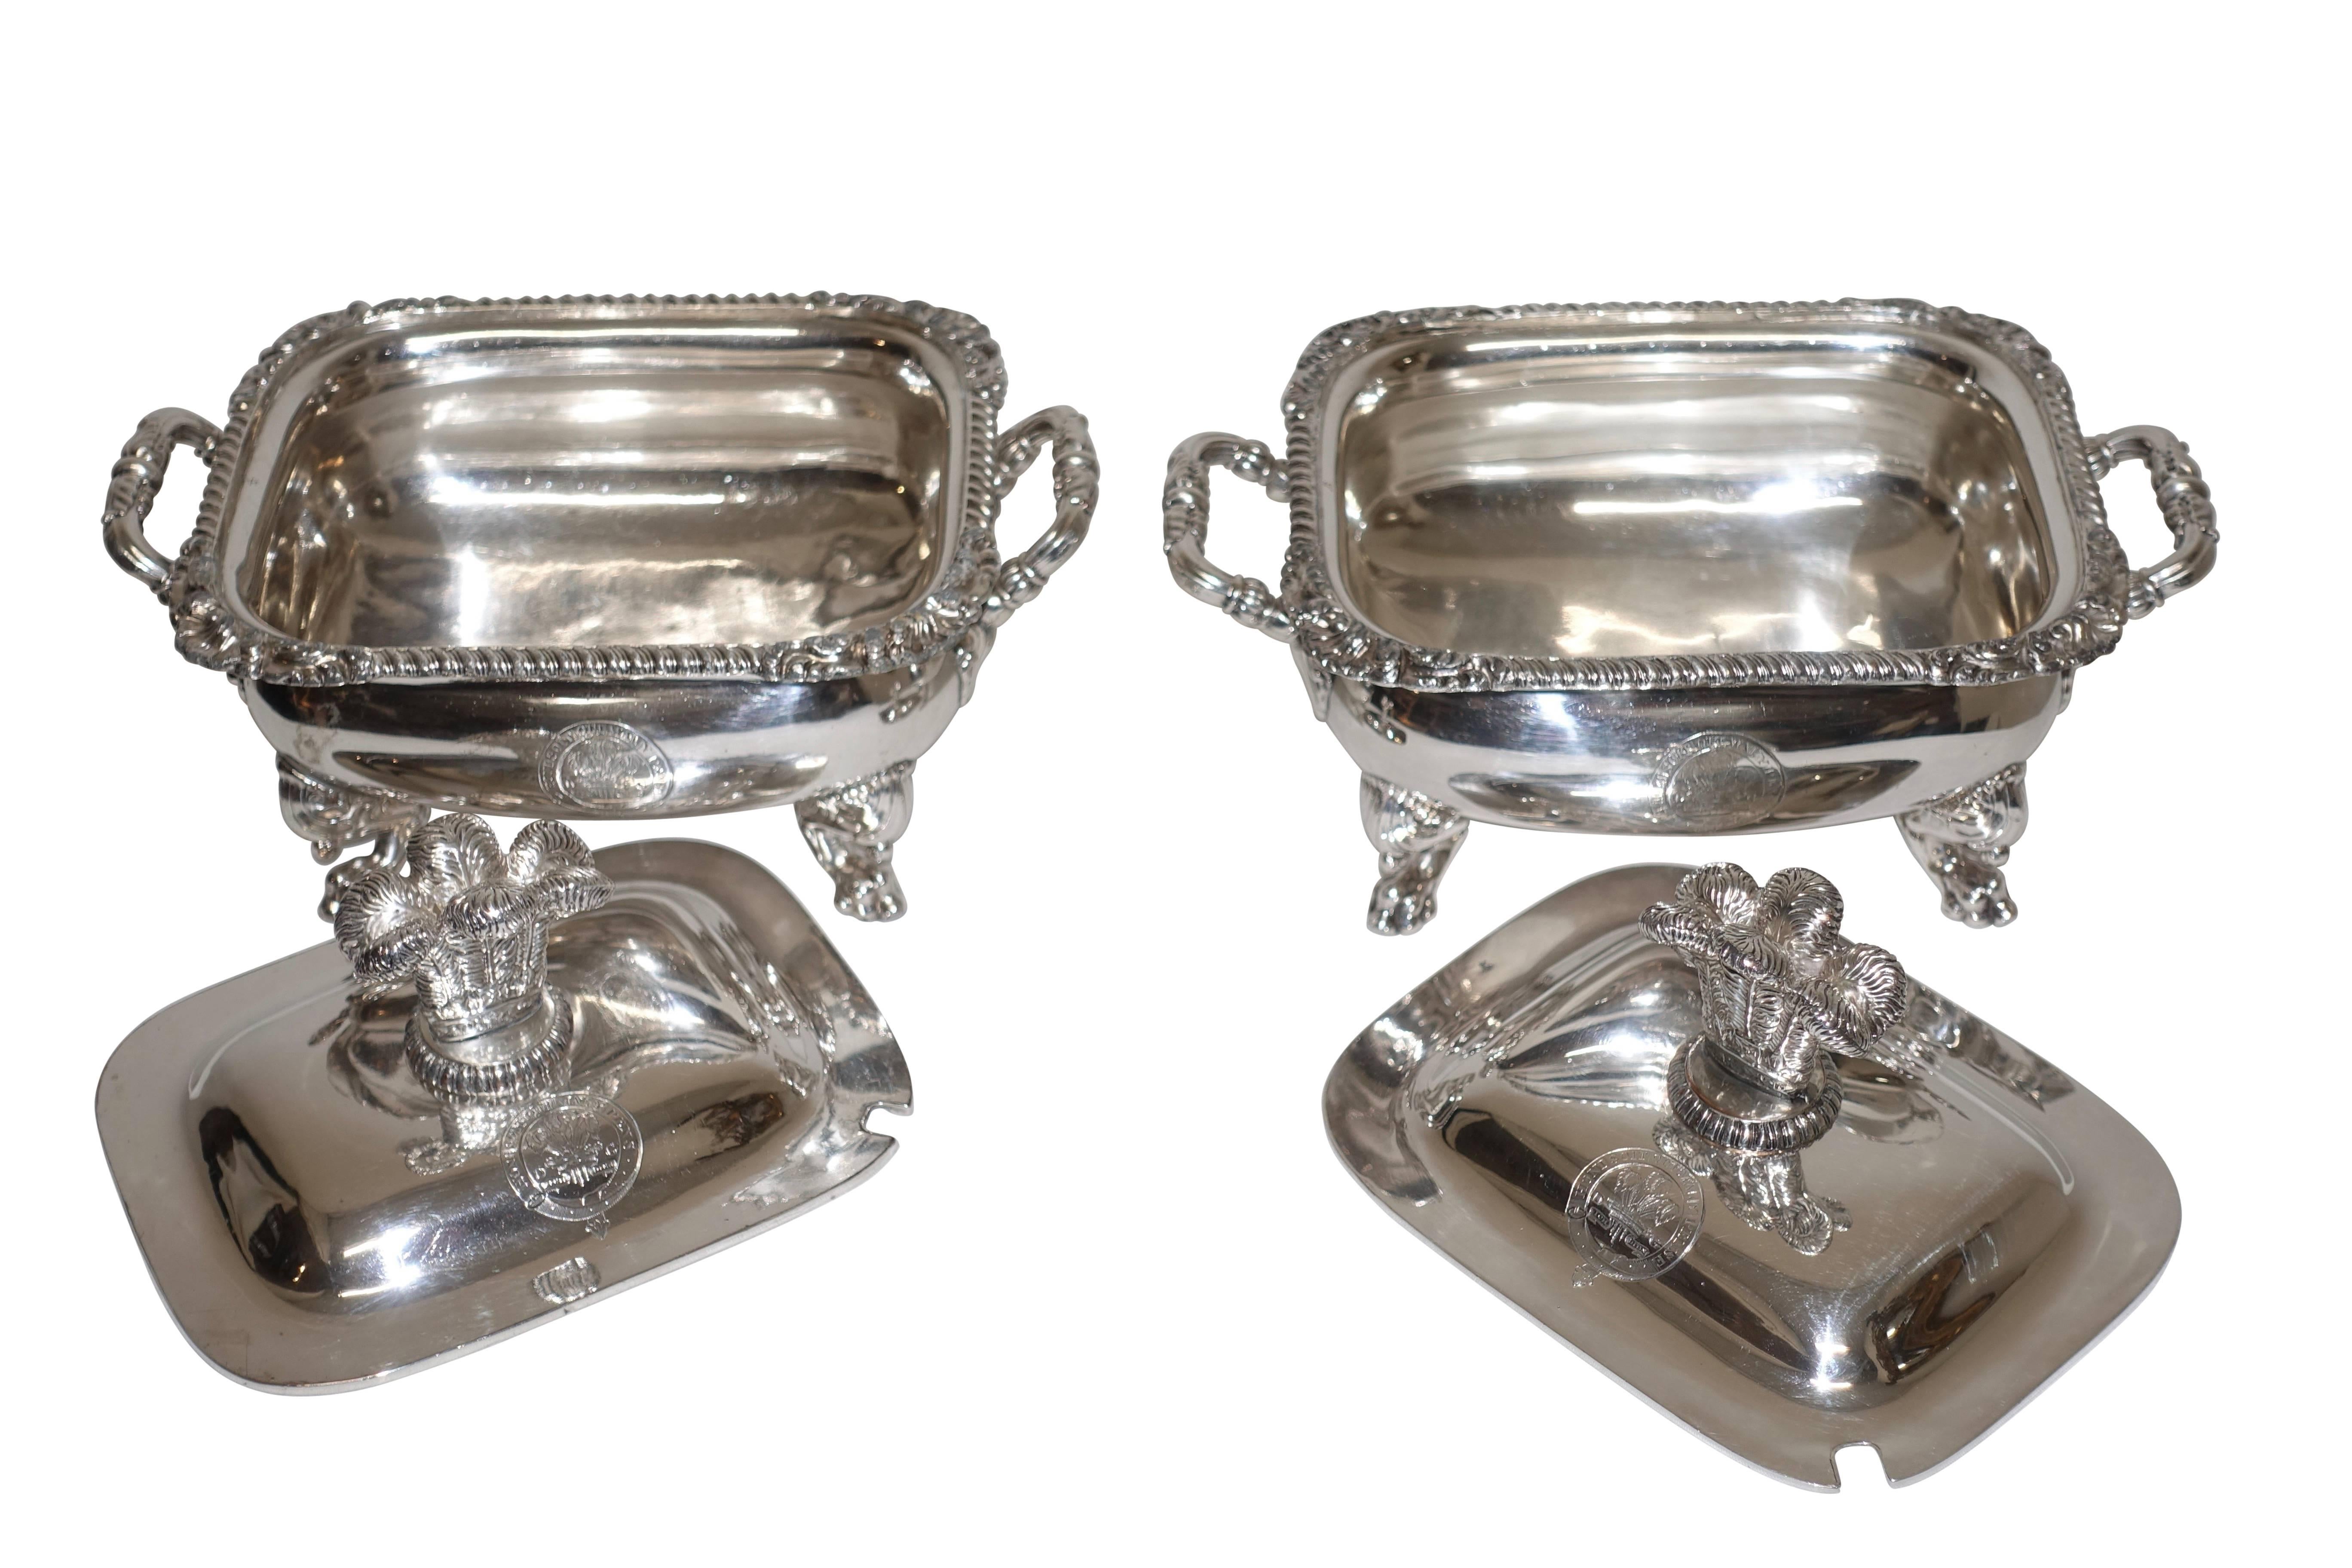 Polished Pair of Sheffield Silver Plate Sauce Tureens English, 19th Century